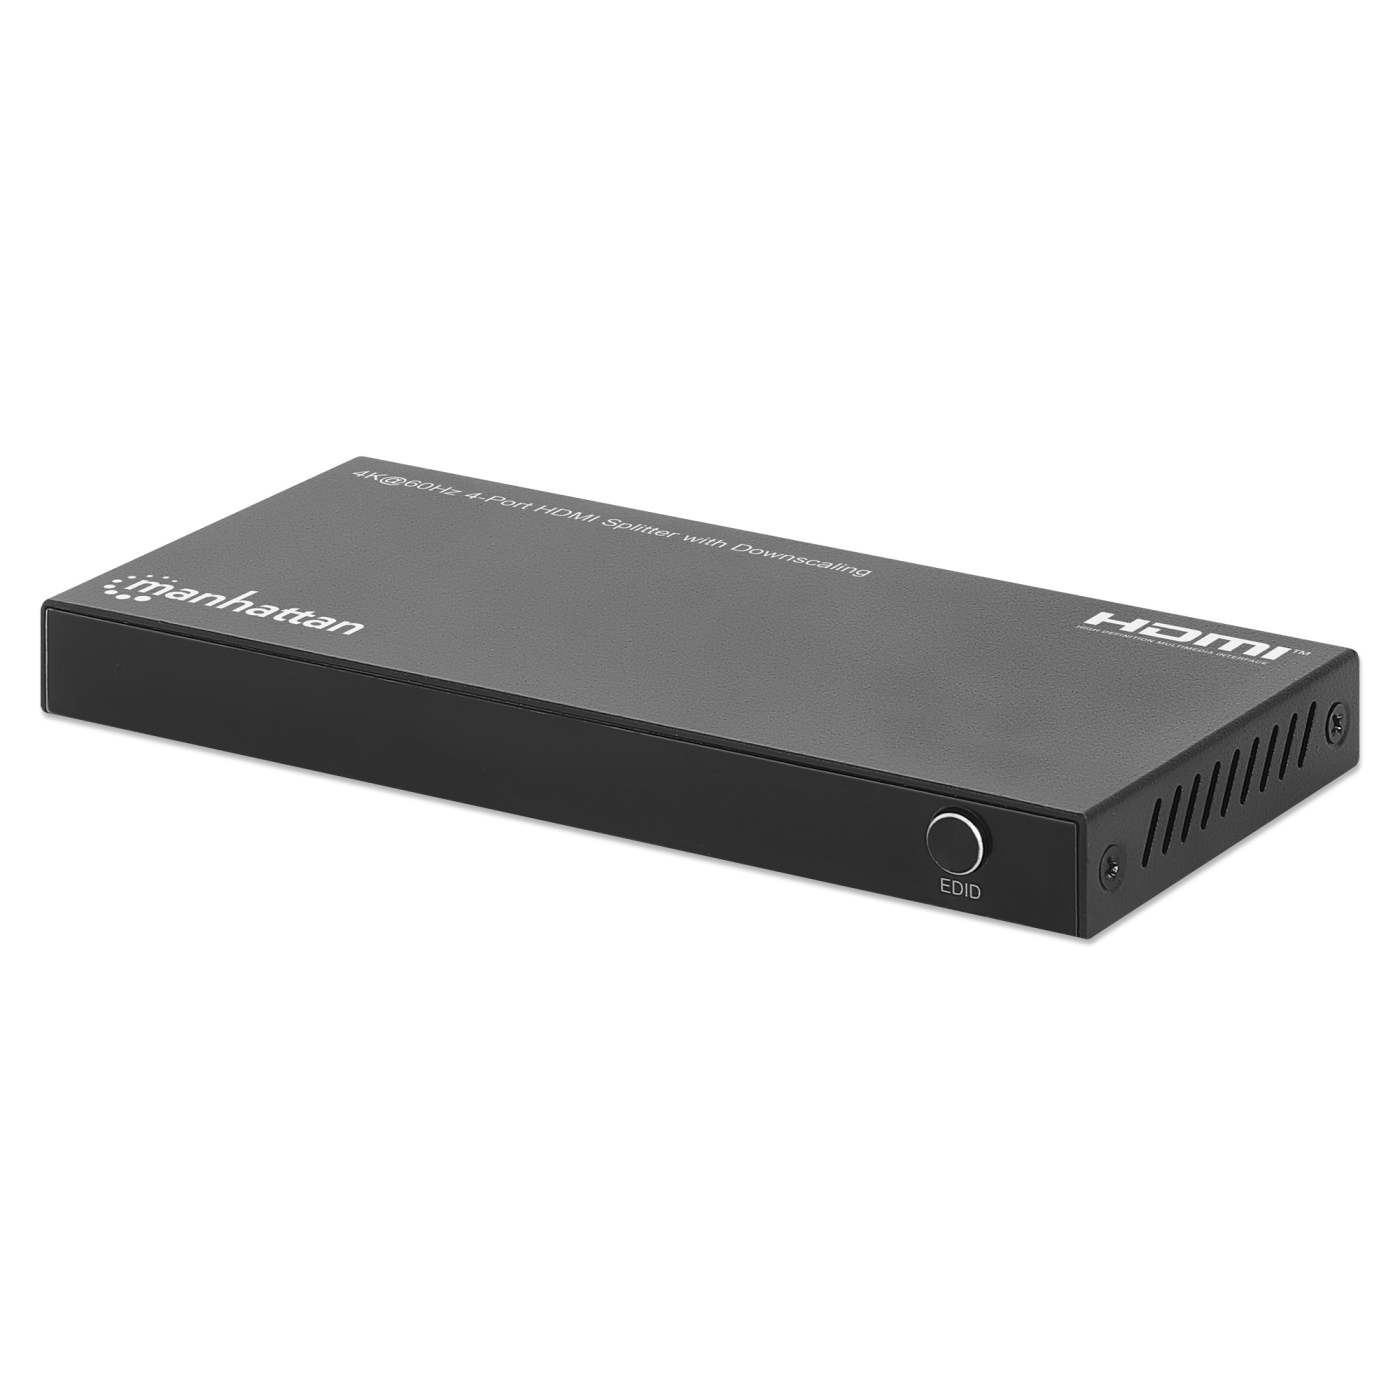 4K@60Hz 4-Port HDMI Splitter with Downscaling Image 1